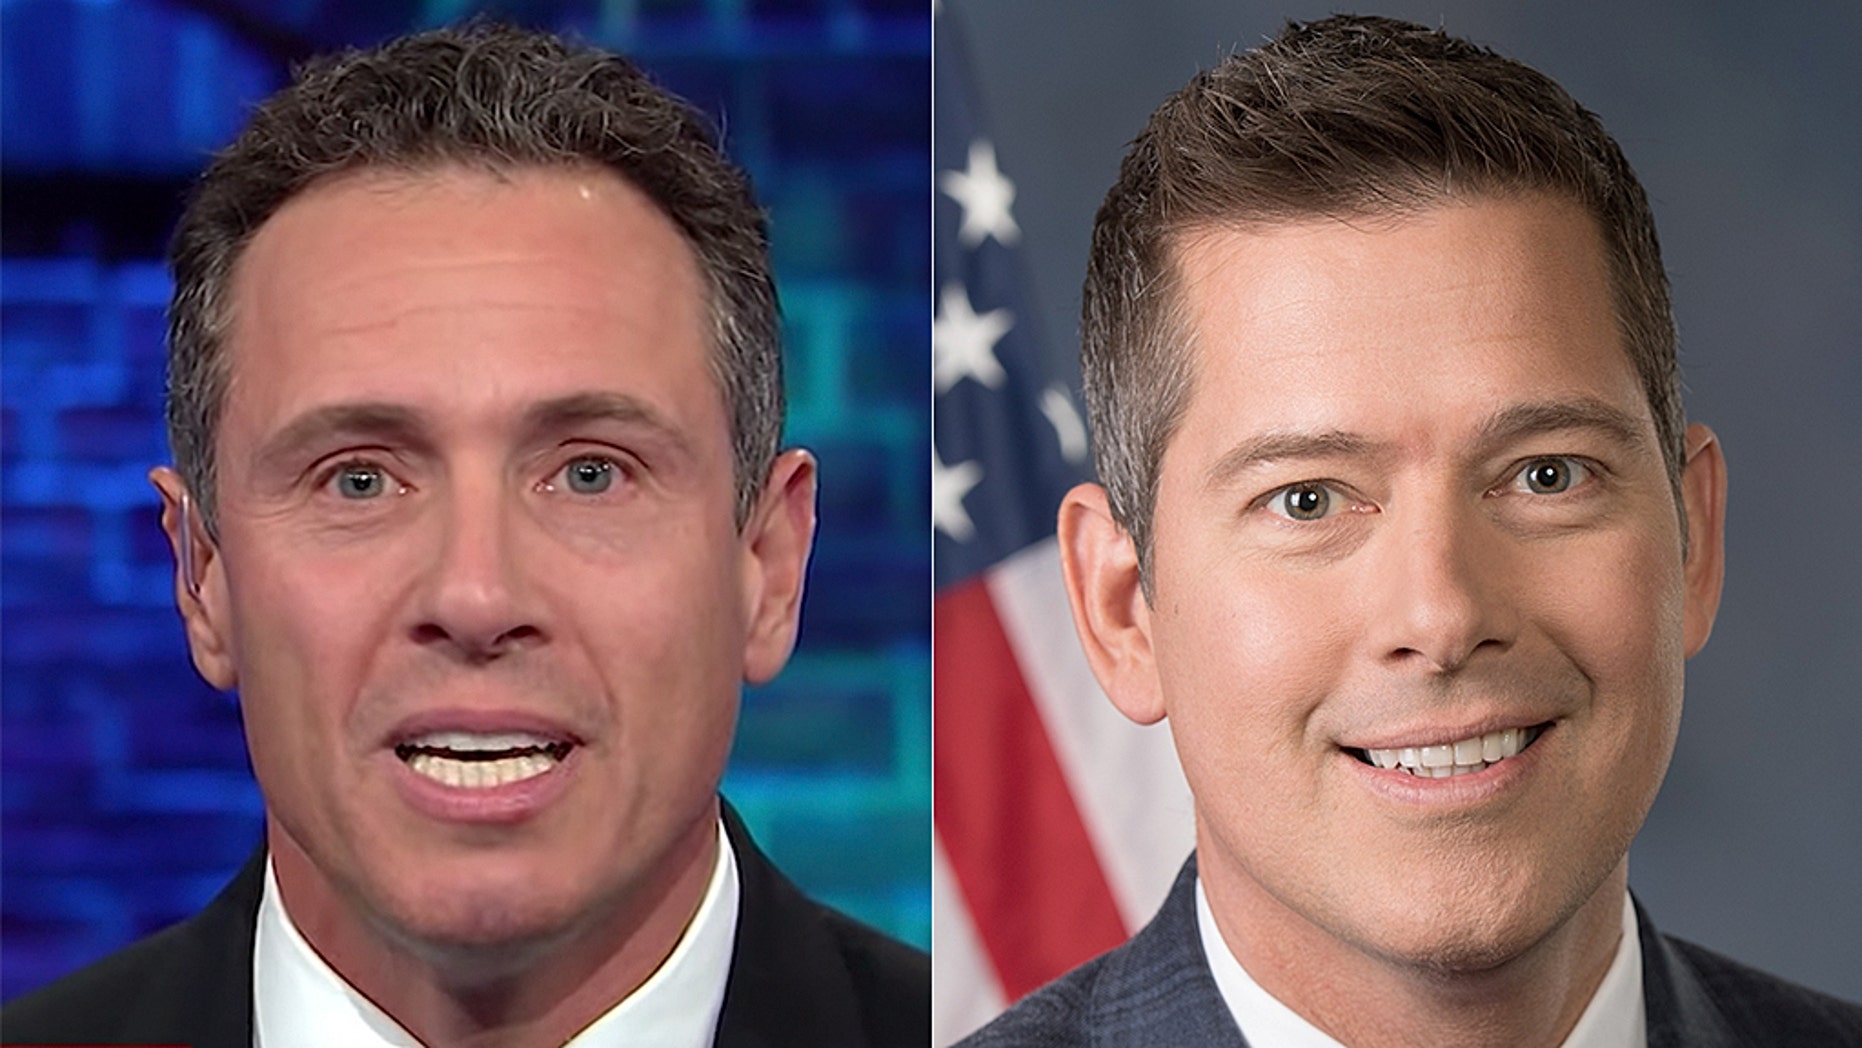 CNN's Chris Cuomo clashed with Congressman Sean Duffy over the findings of Robert Mueller's report